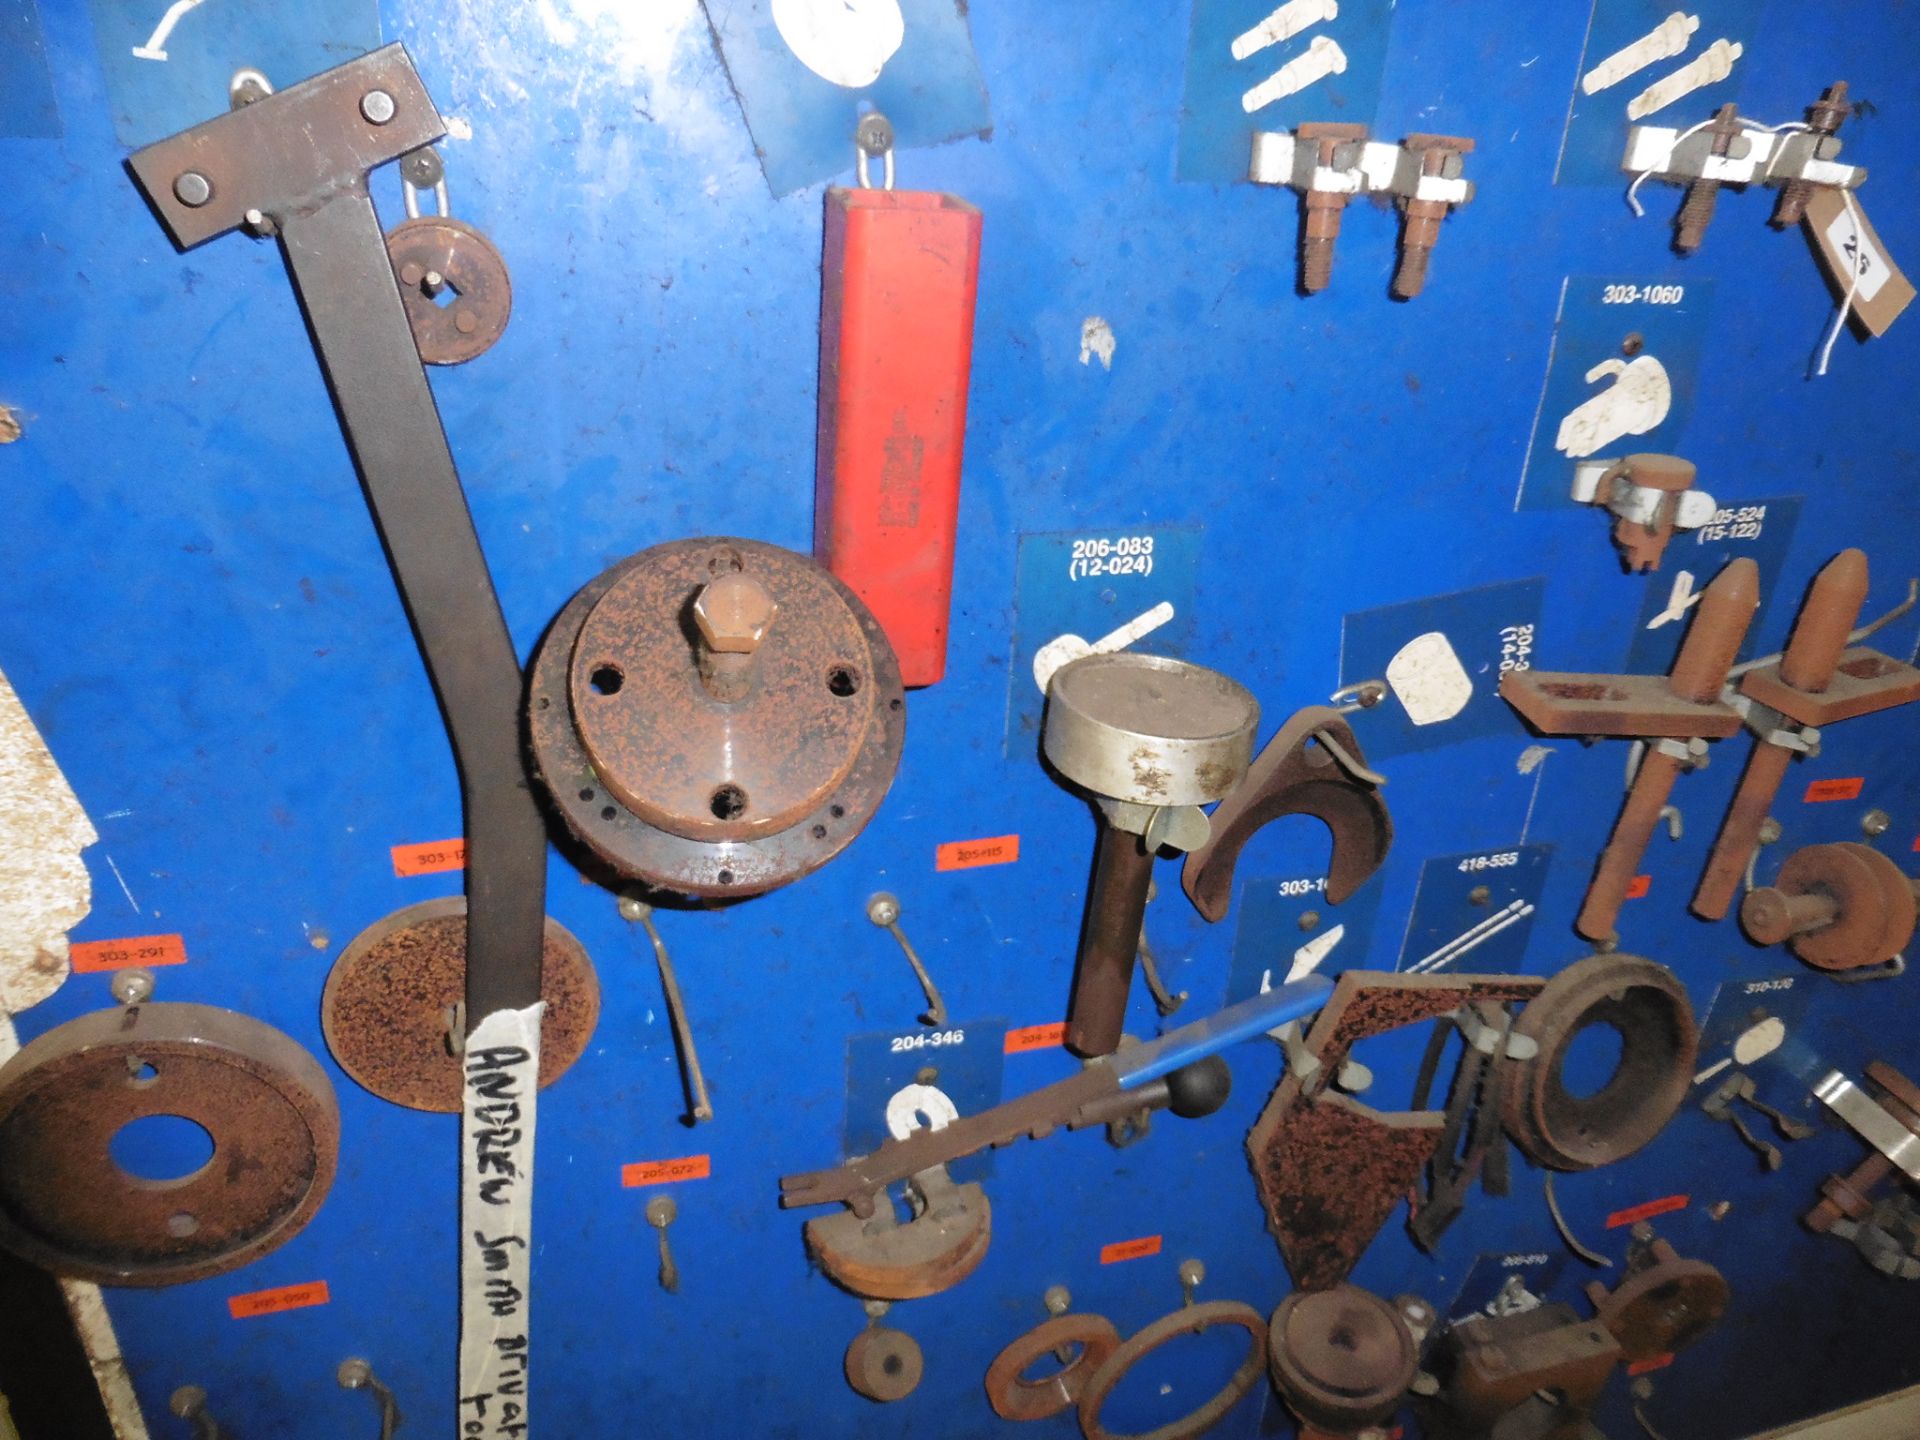 Wall mounted rack of specialist engine tools and jigs - Image 2 of 3